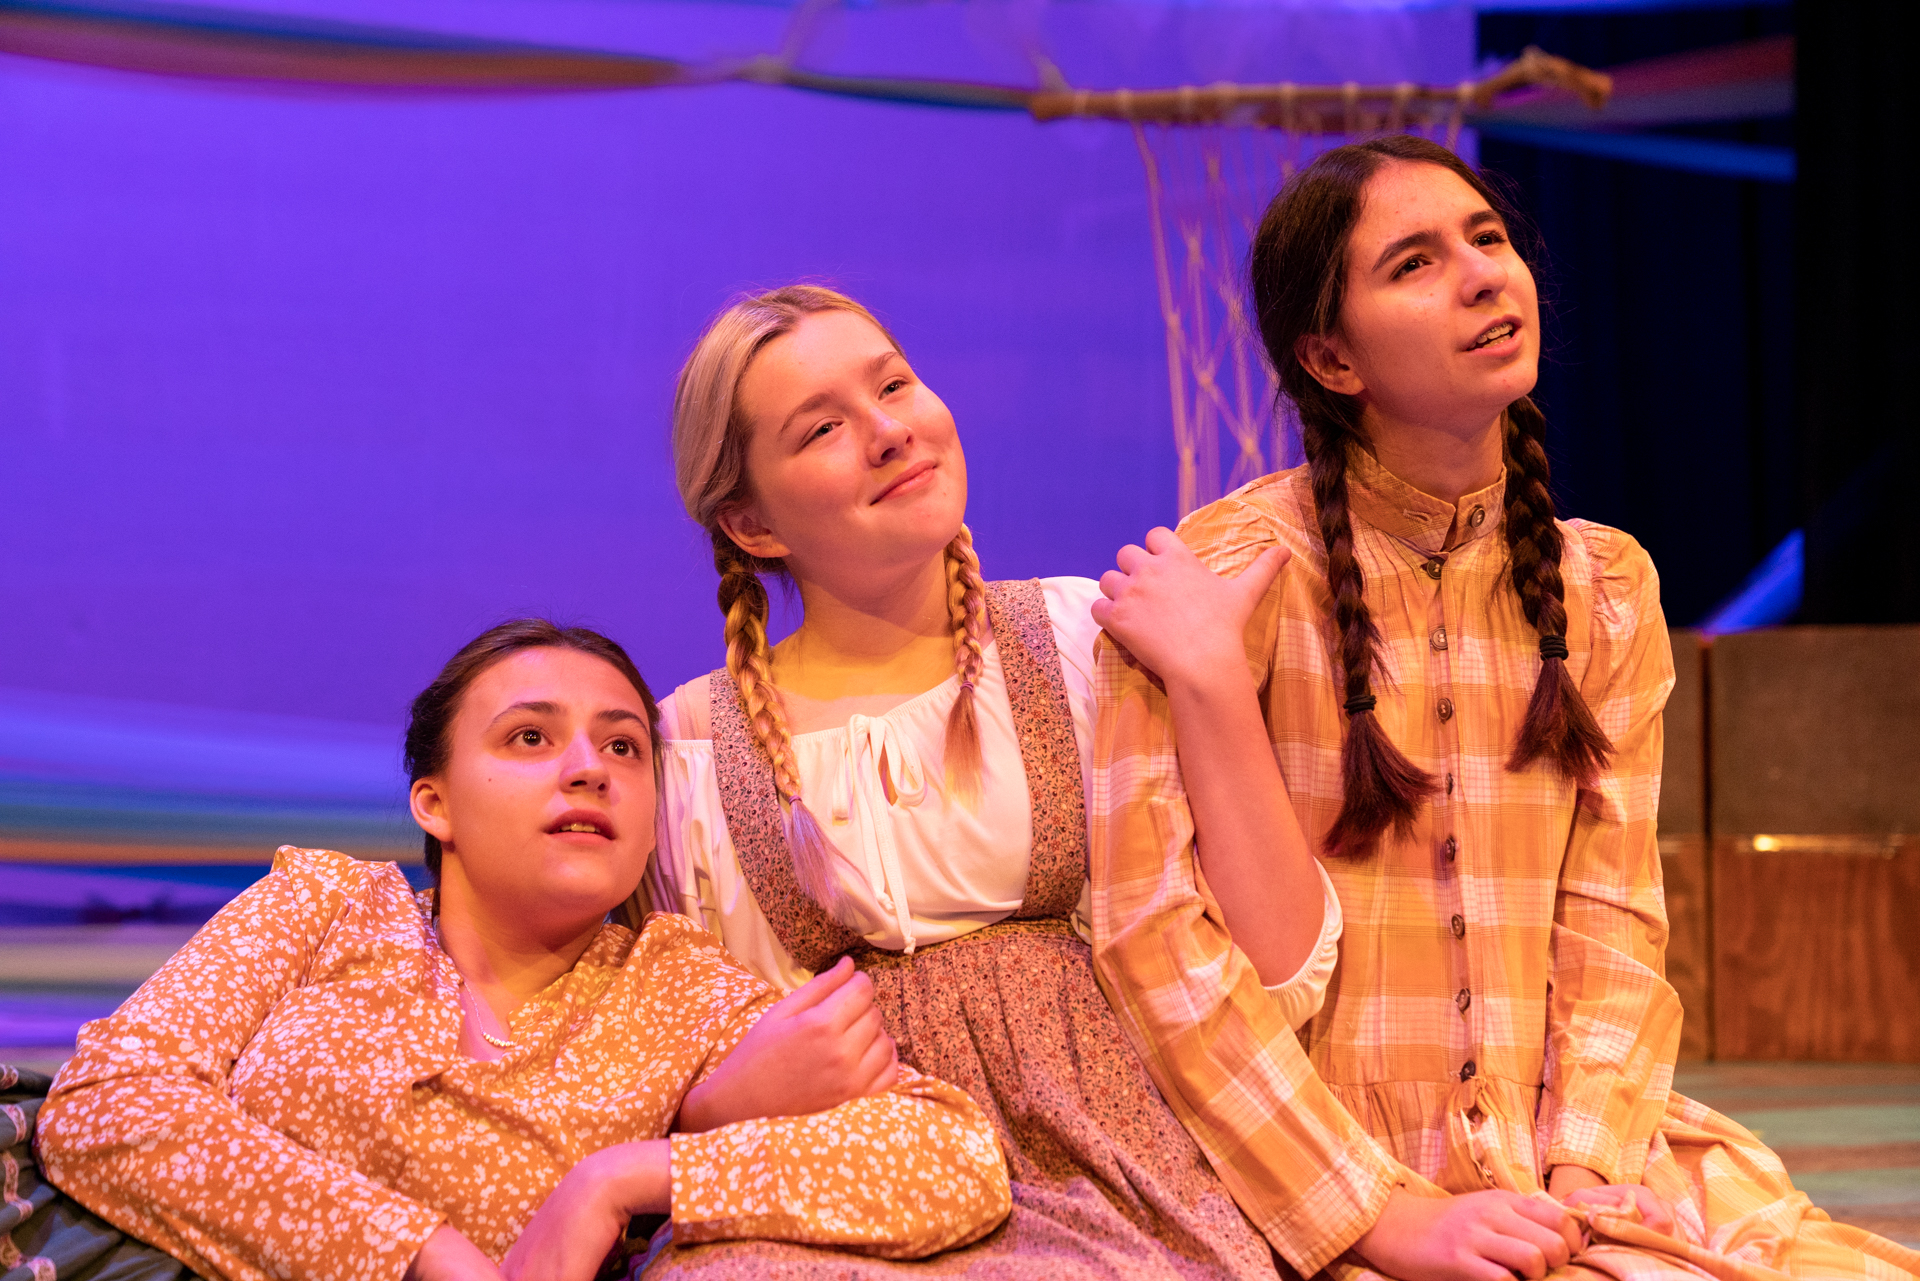 Three young high school girls sit, lit with theatrical lighting, arms linked and looking out wistfully as part of a scene in "The Selkie Wife."